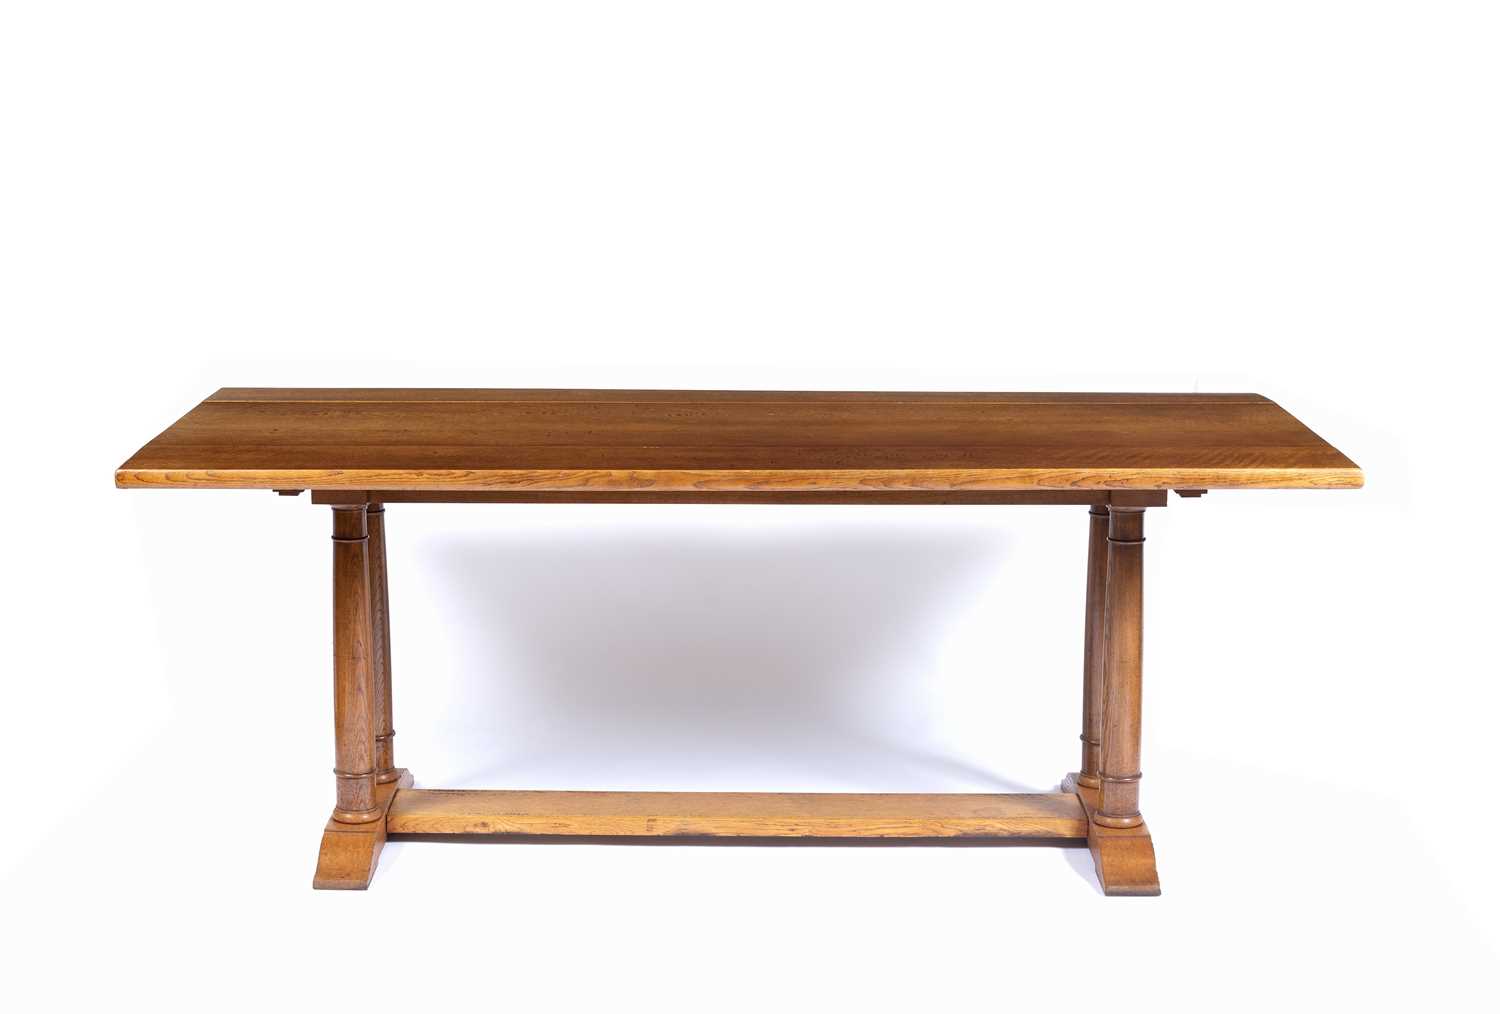 Heals 'Tilden' oak refectory table, circa 1920, with later modifications to make it into a drop-leaf